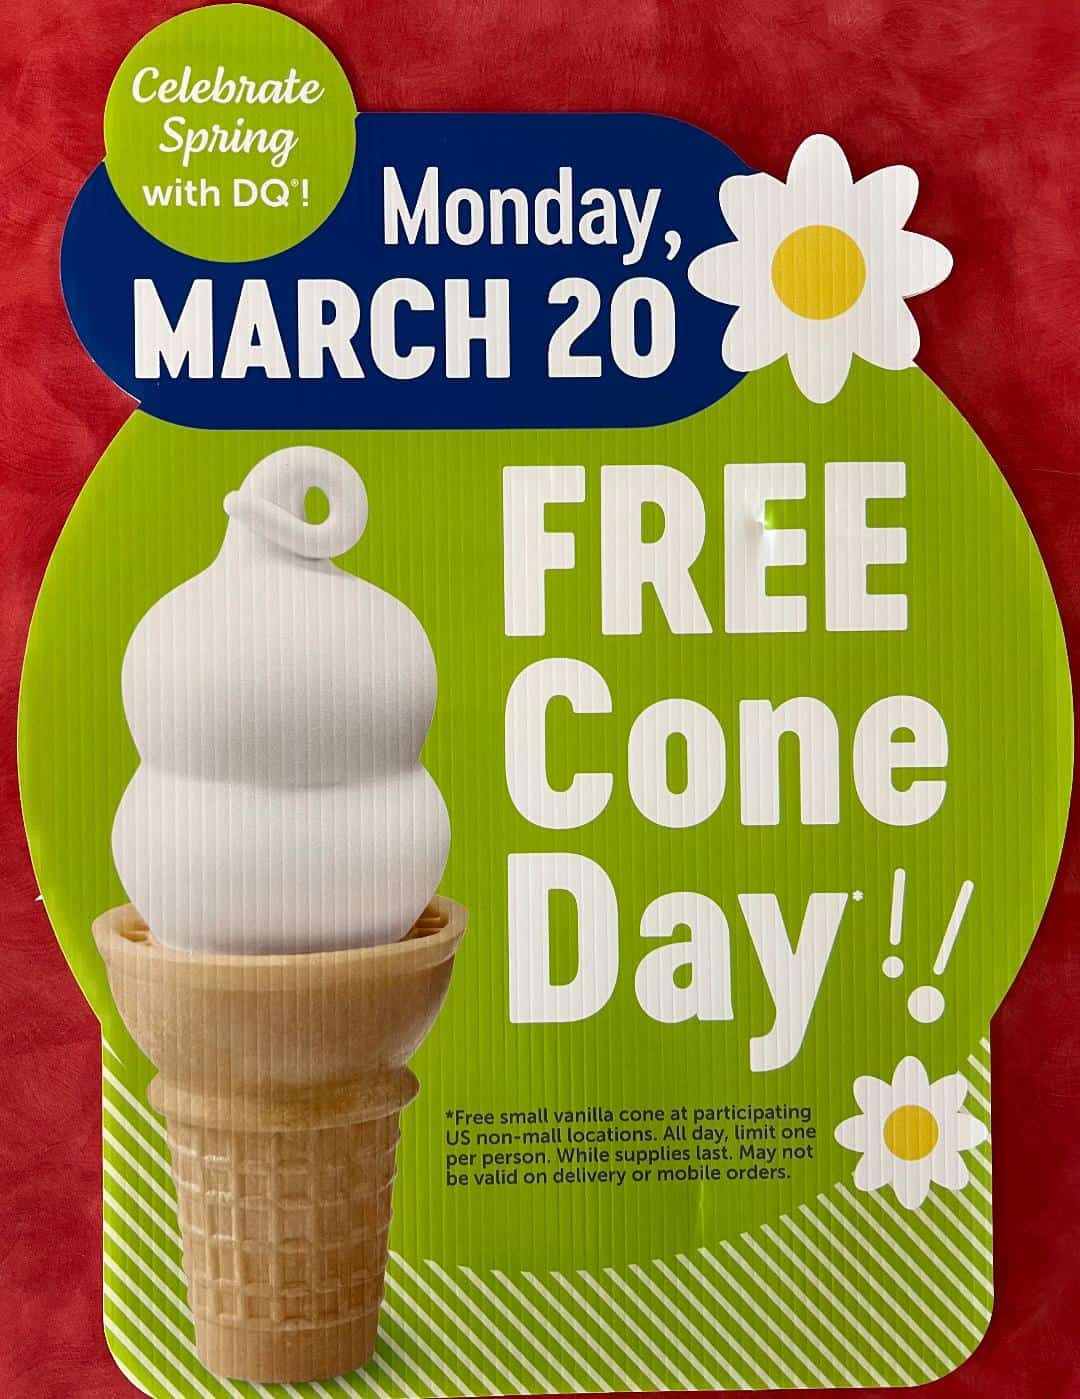 Dairy Queen Hosts Free Cone Day on March 20 Living On The Cheap